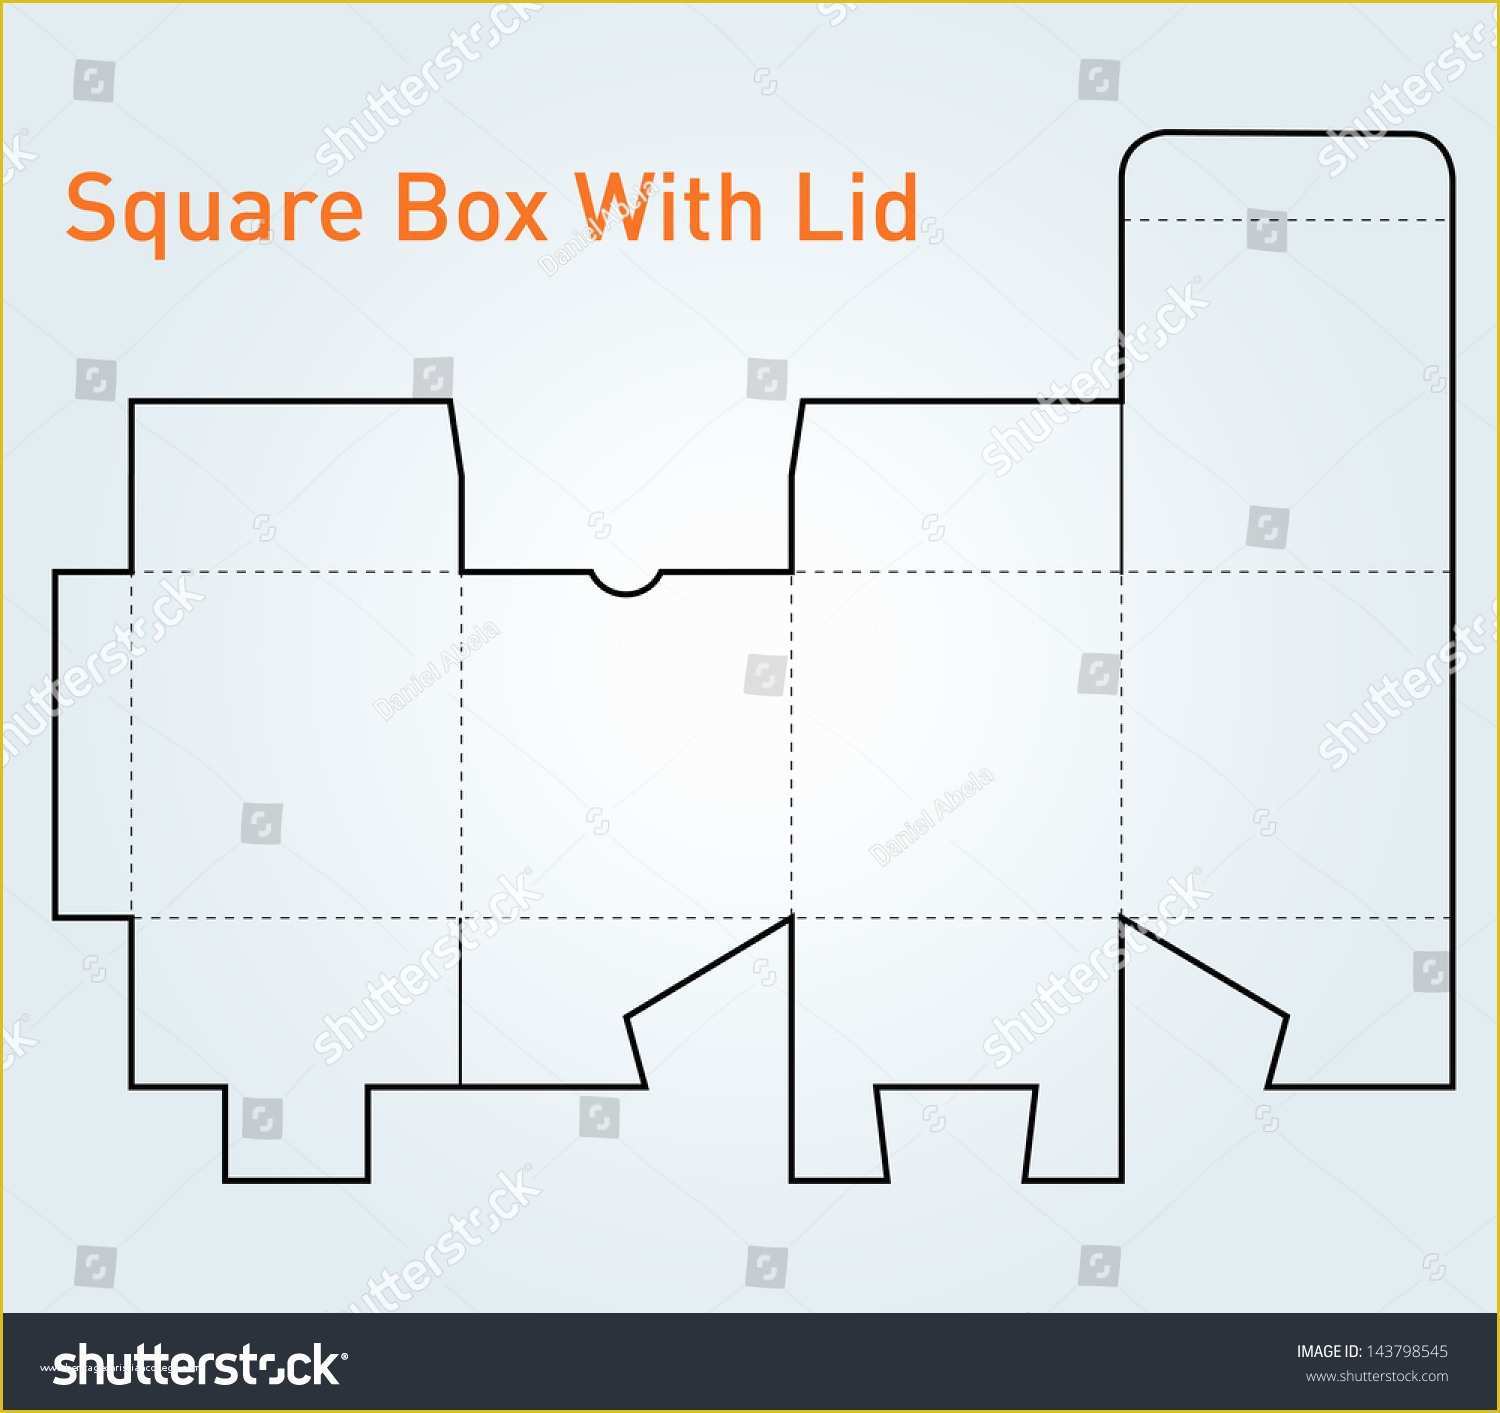 Box with Lid Templates Free Of Packaging Square Box Lid Template Vector Stock Vector